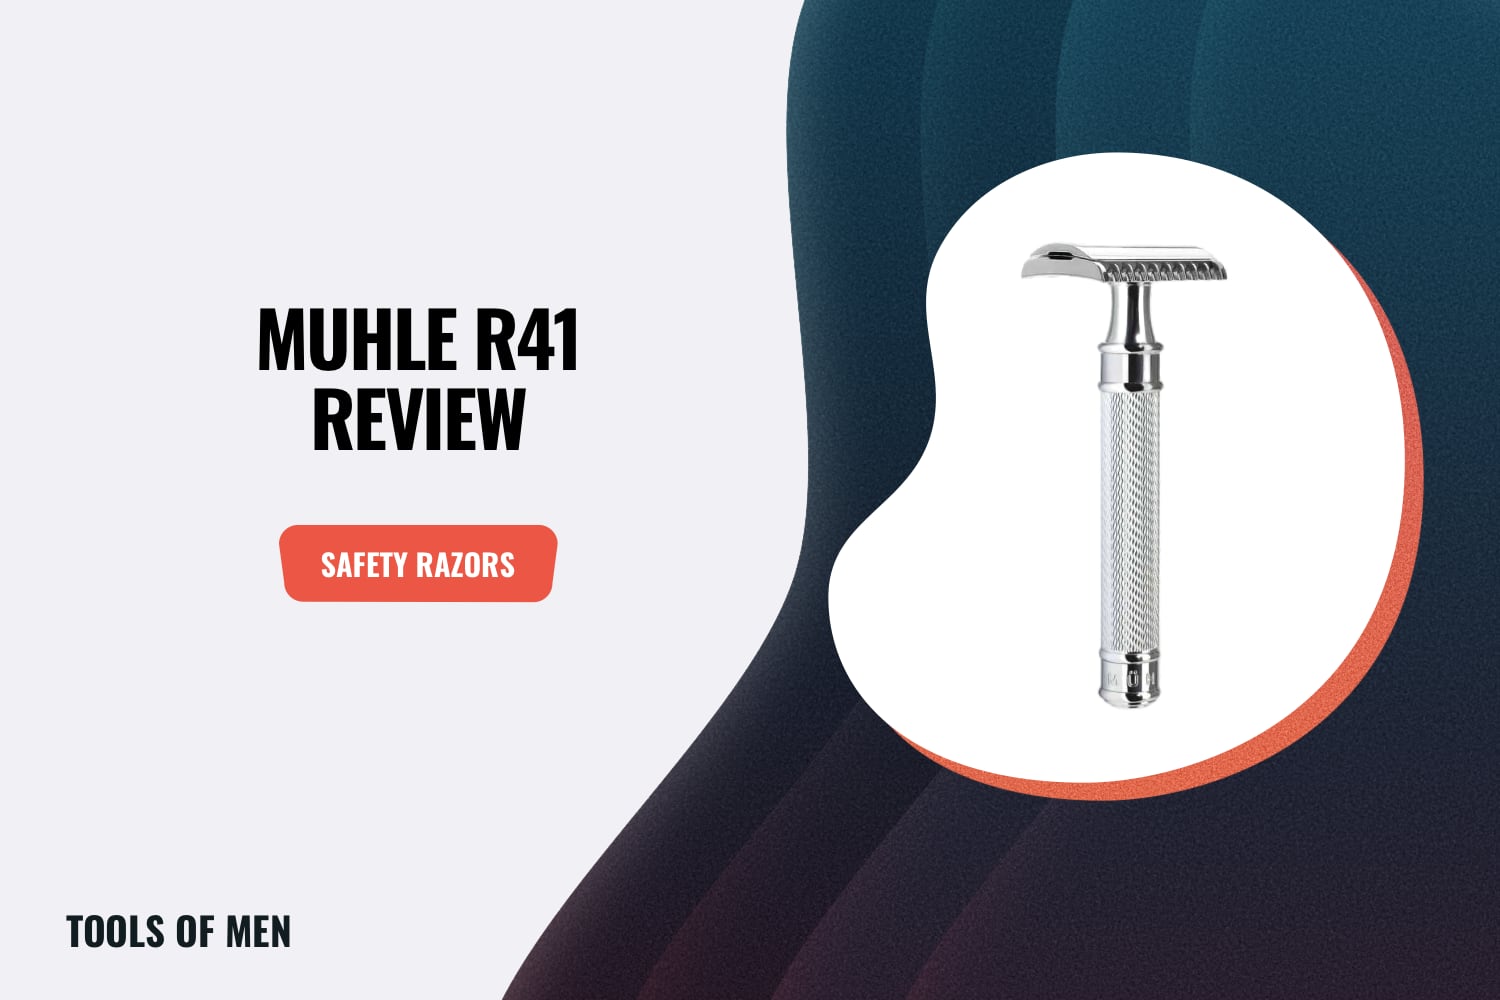 Muhle r41 Review feature image